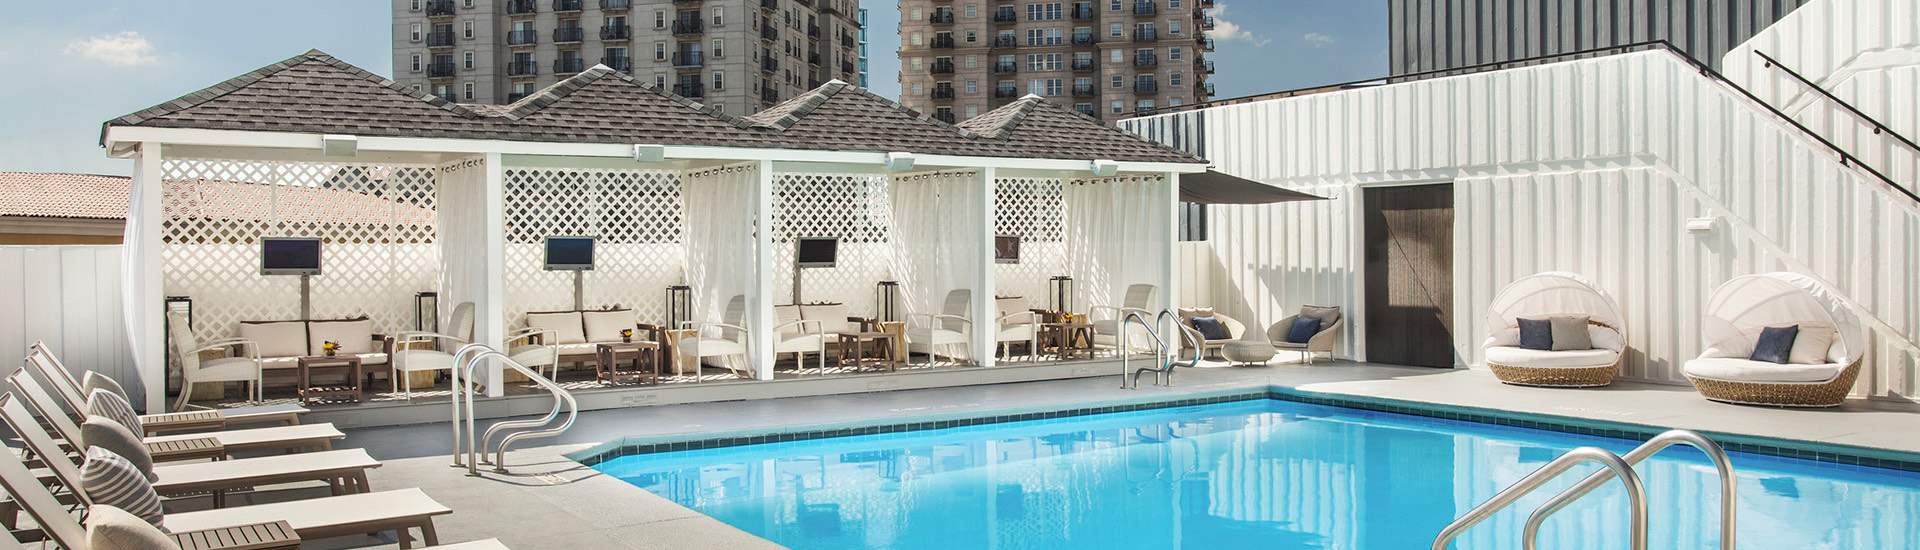 outdoor pool with cabanas, lounge chairs, and suntents